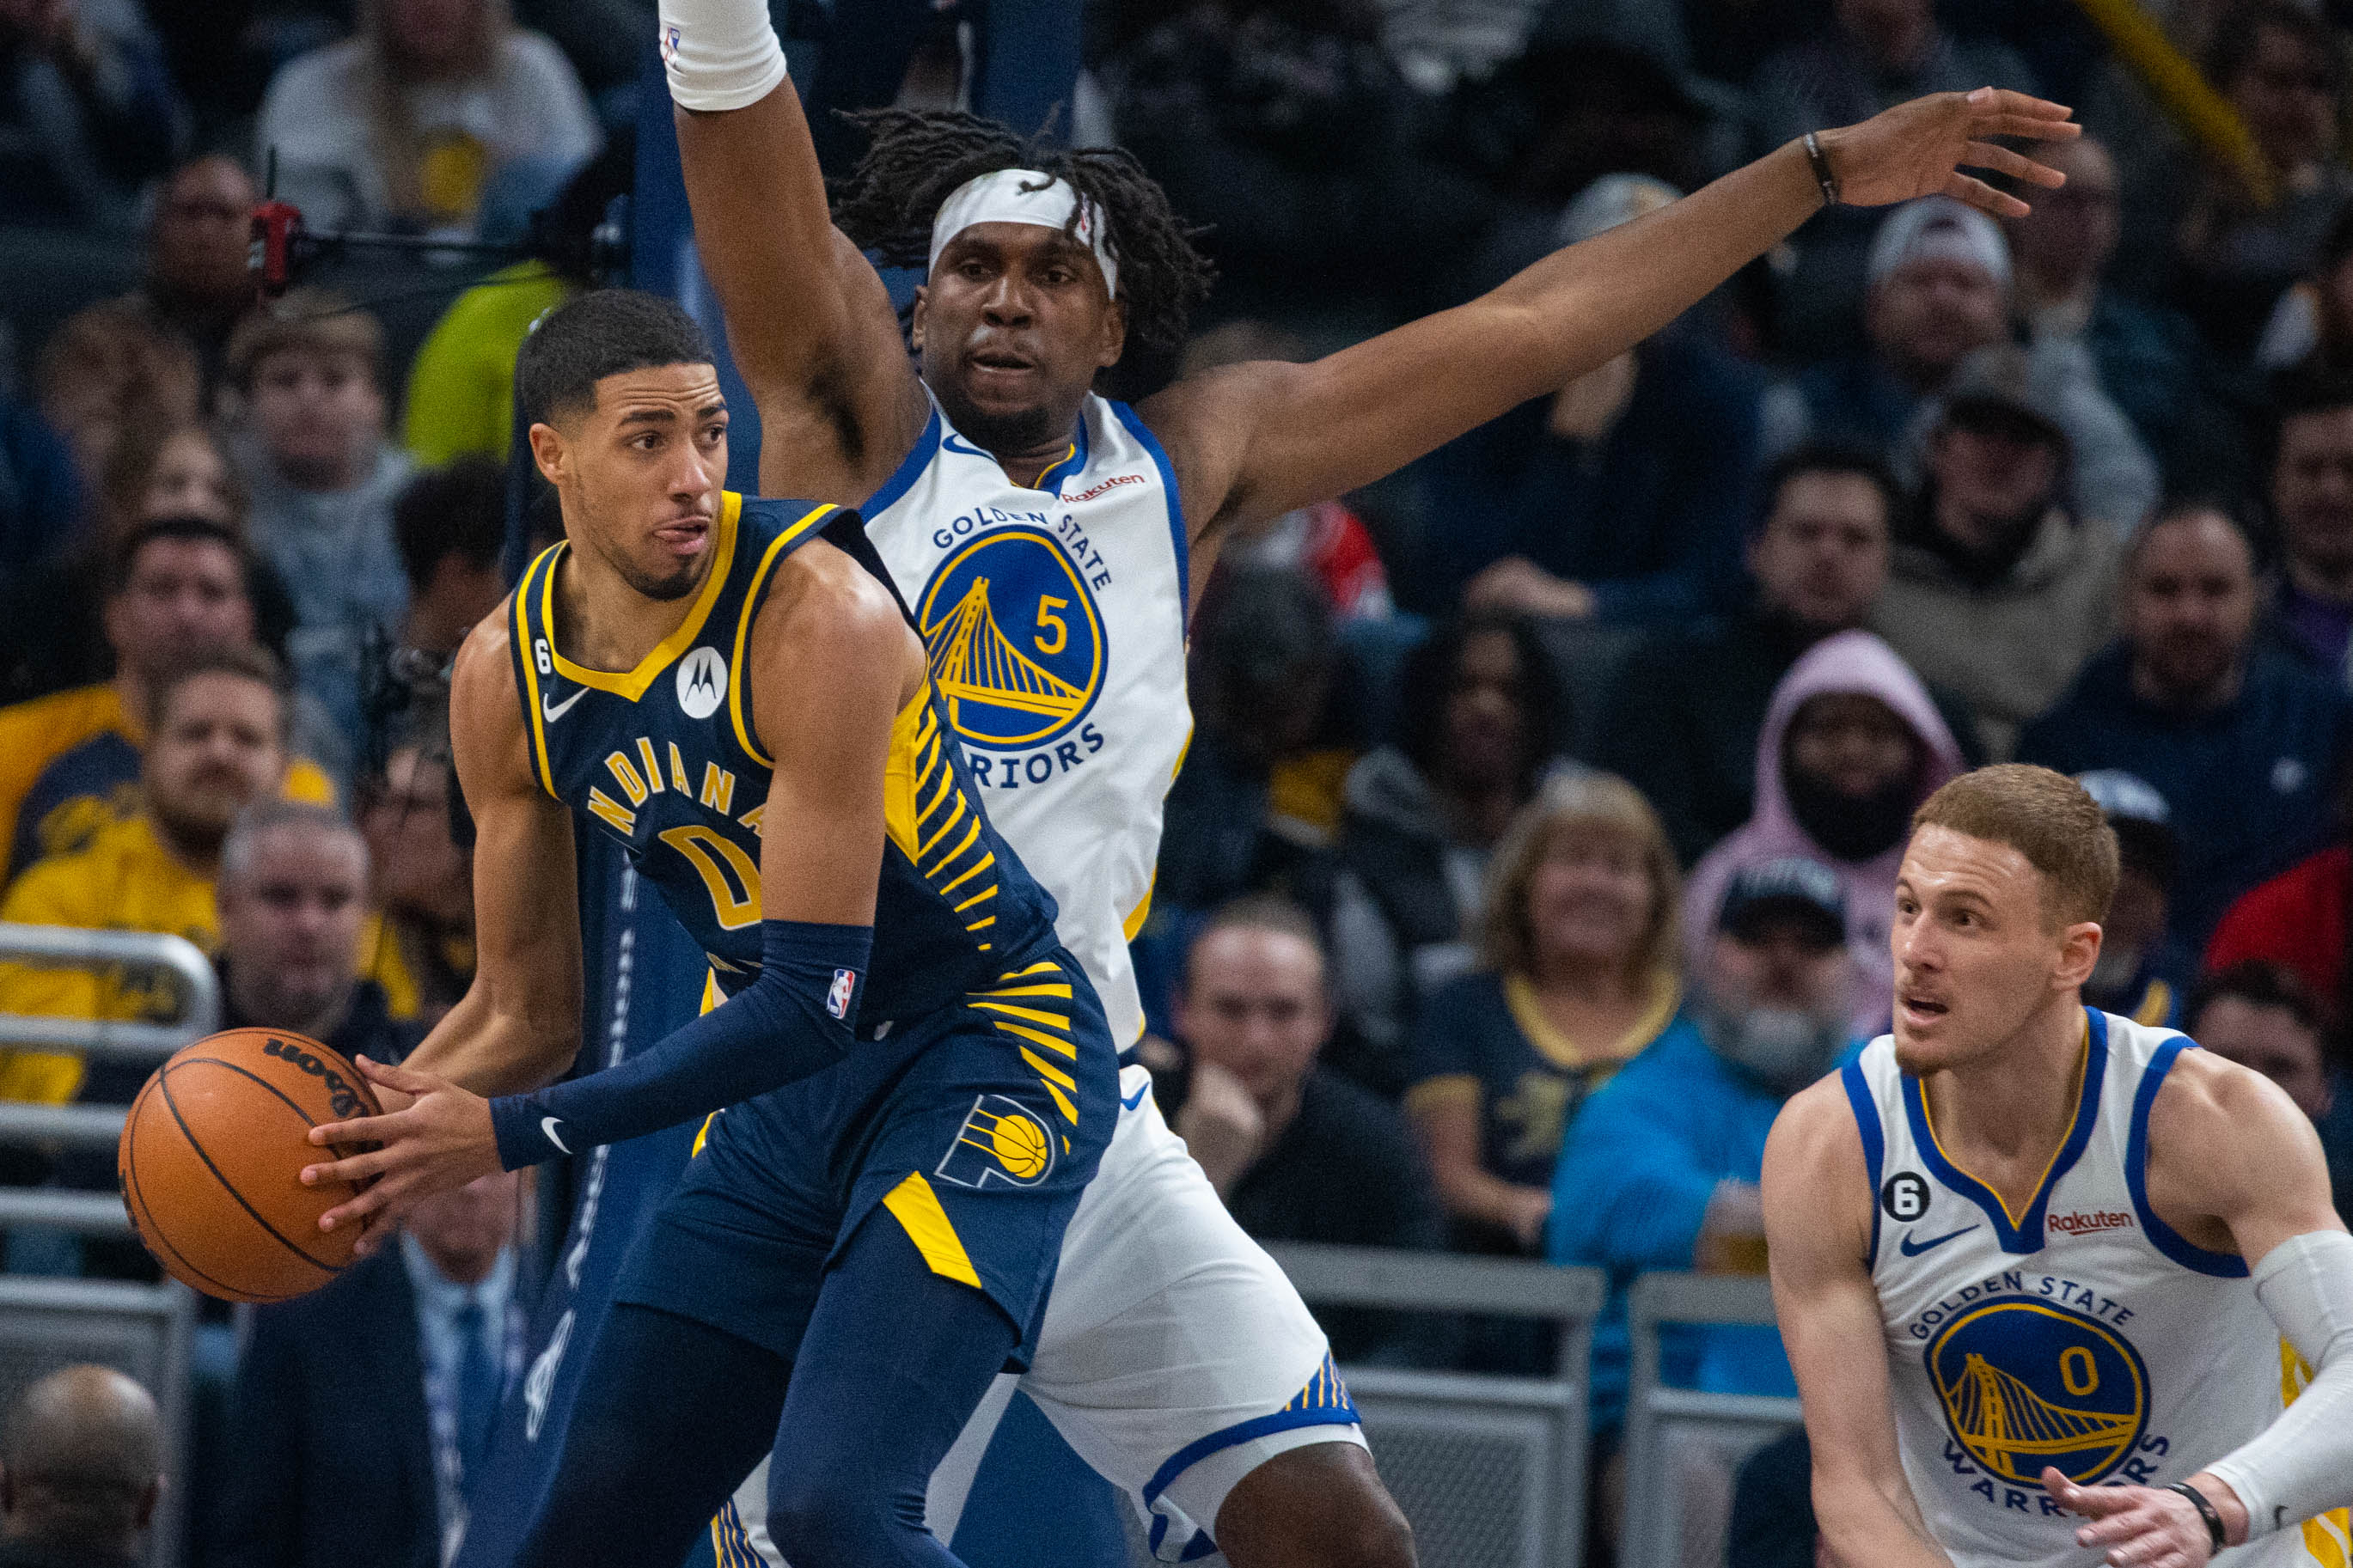 Indiana Pacers sweep season series with second win over Golden State Warriors